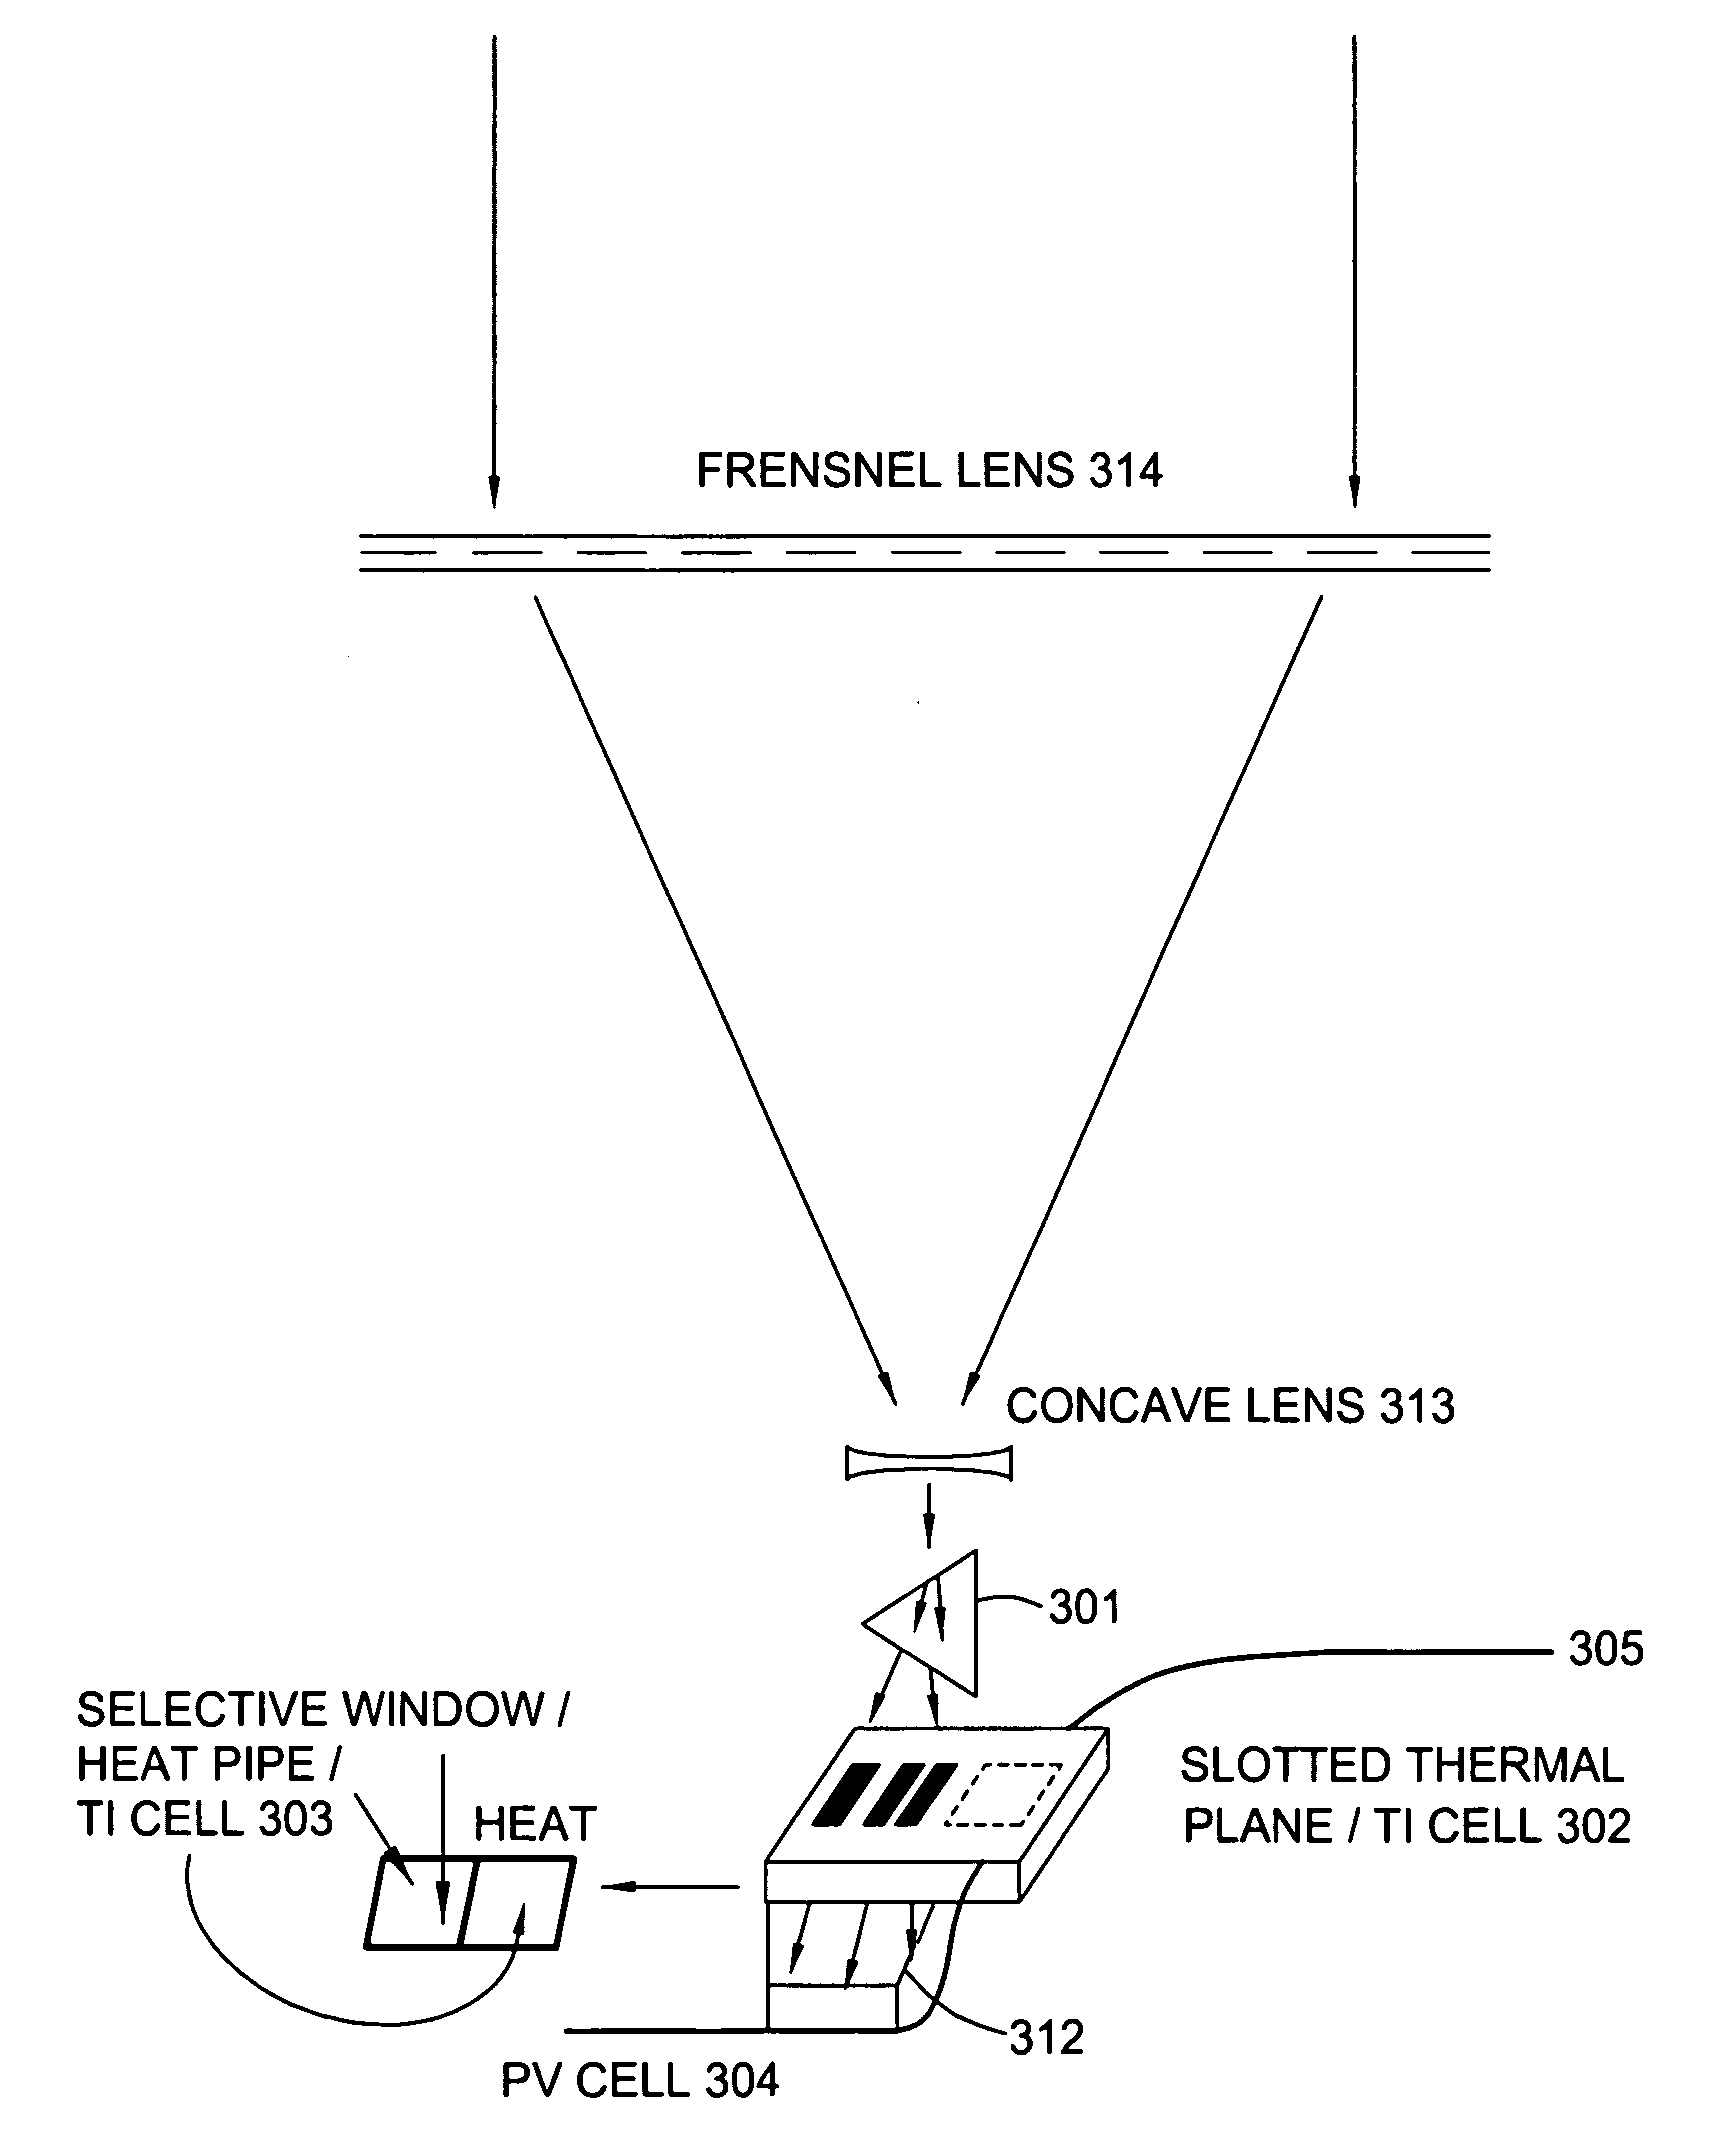 Integrated solar energy conversion system, method, and apparatus